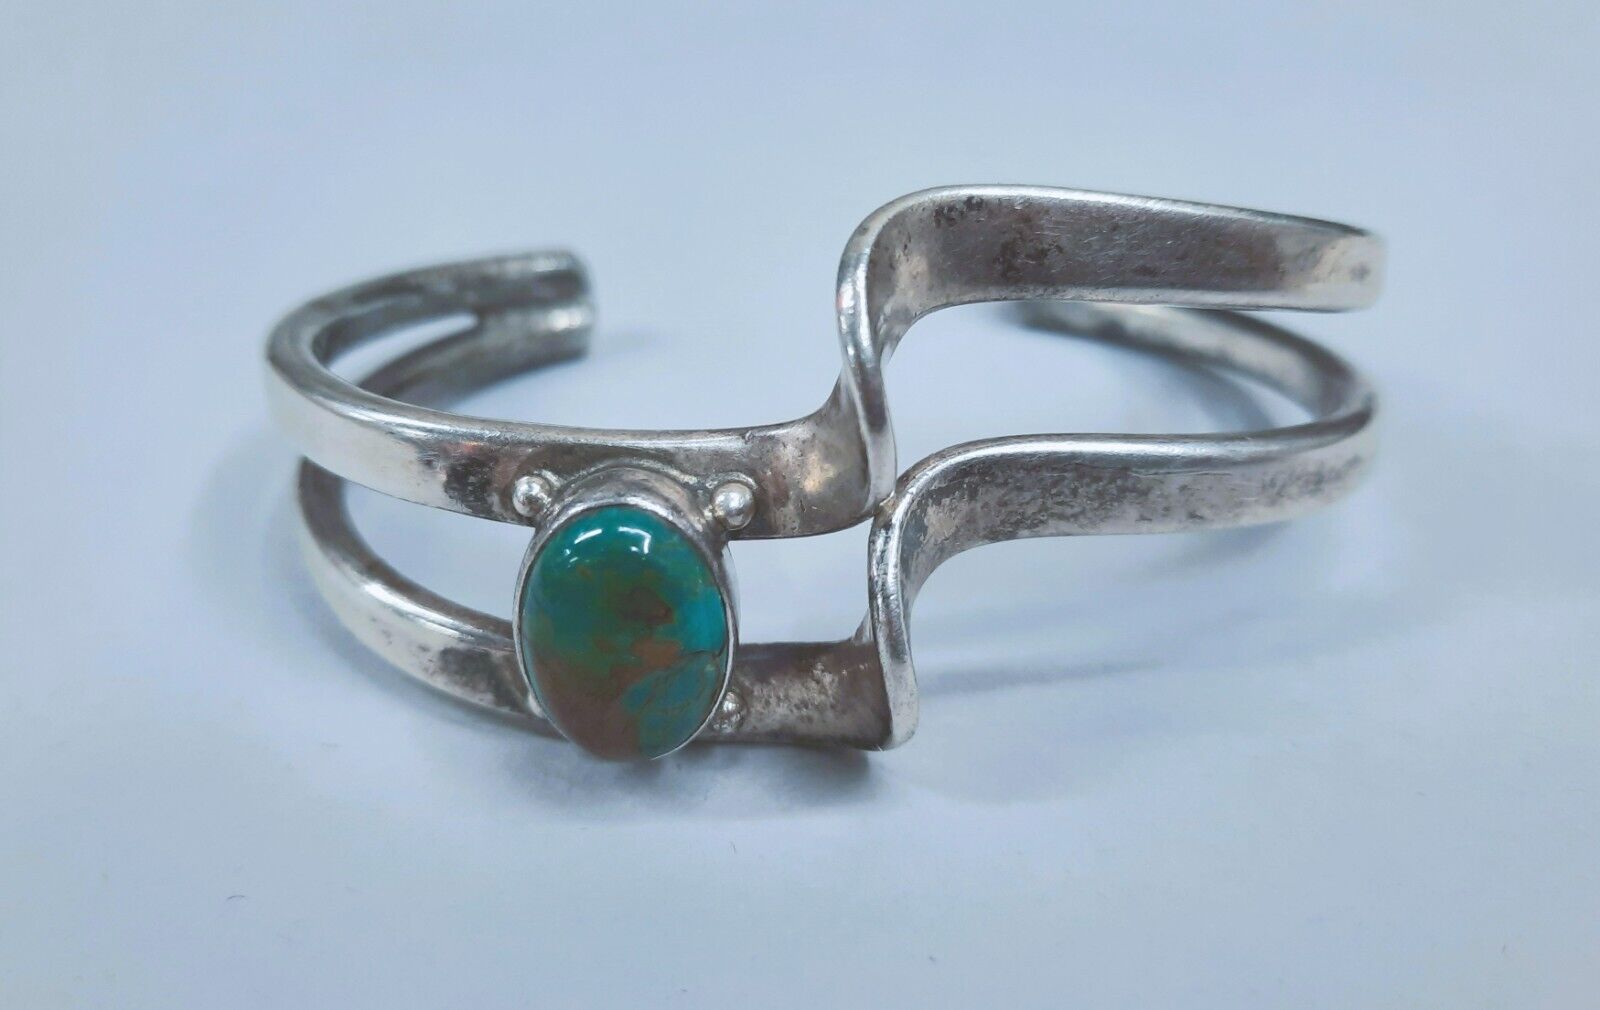 Vintage Navajo Silver and Turquoise Cuff Bracelet